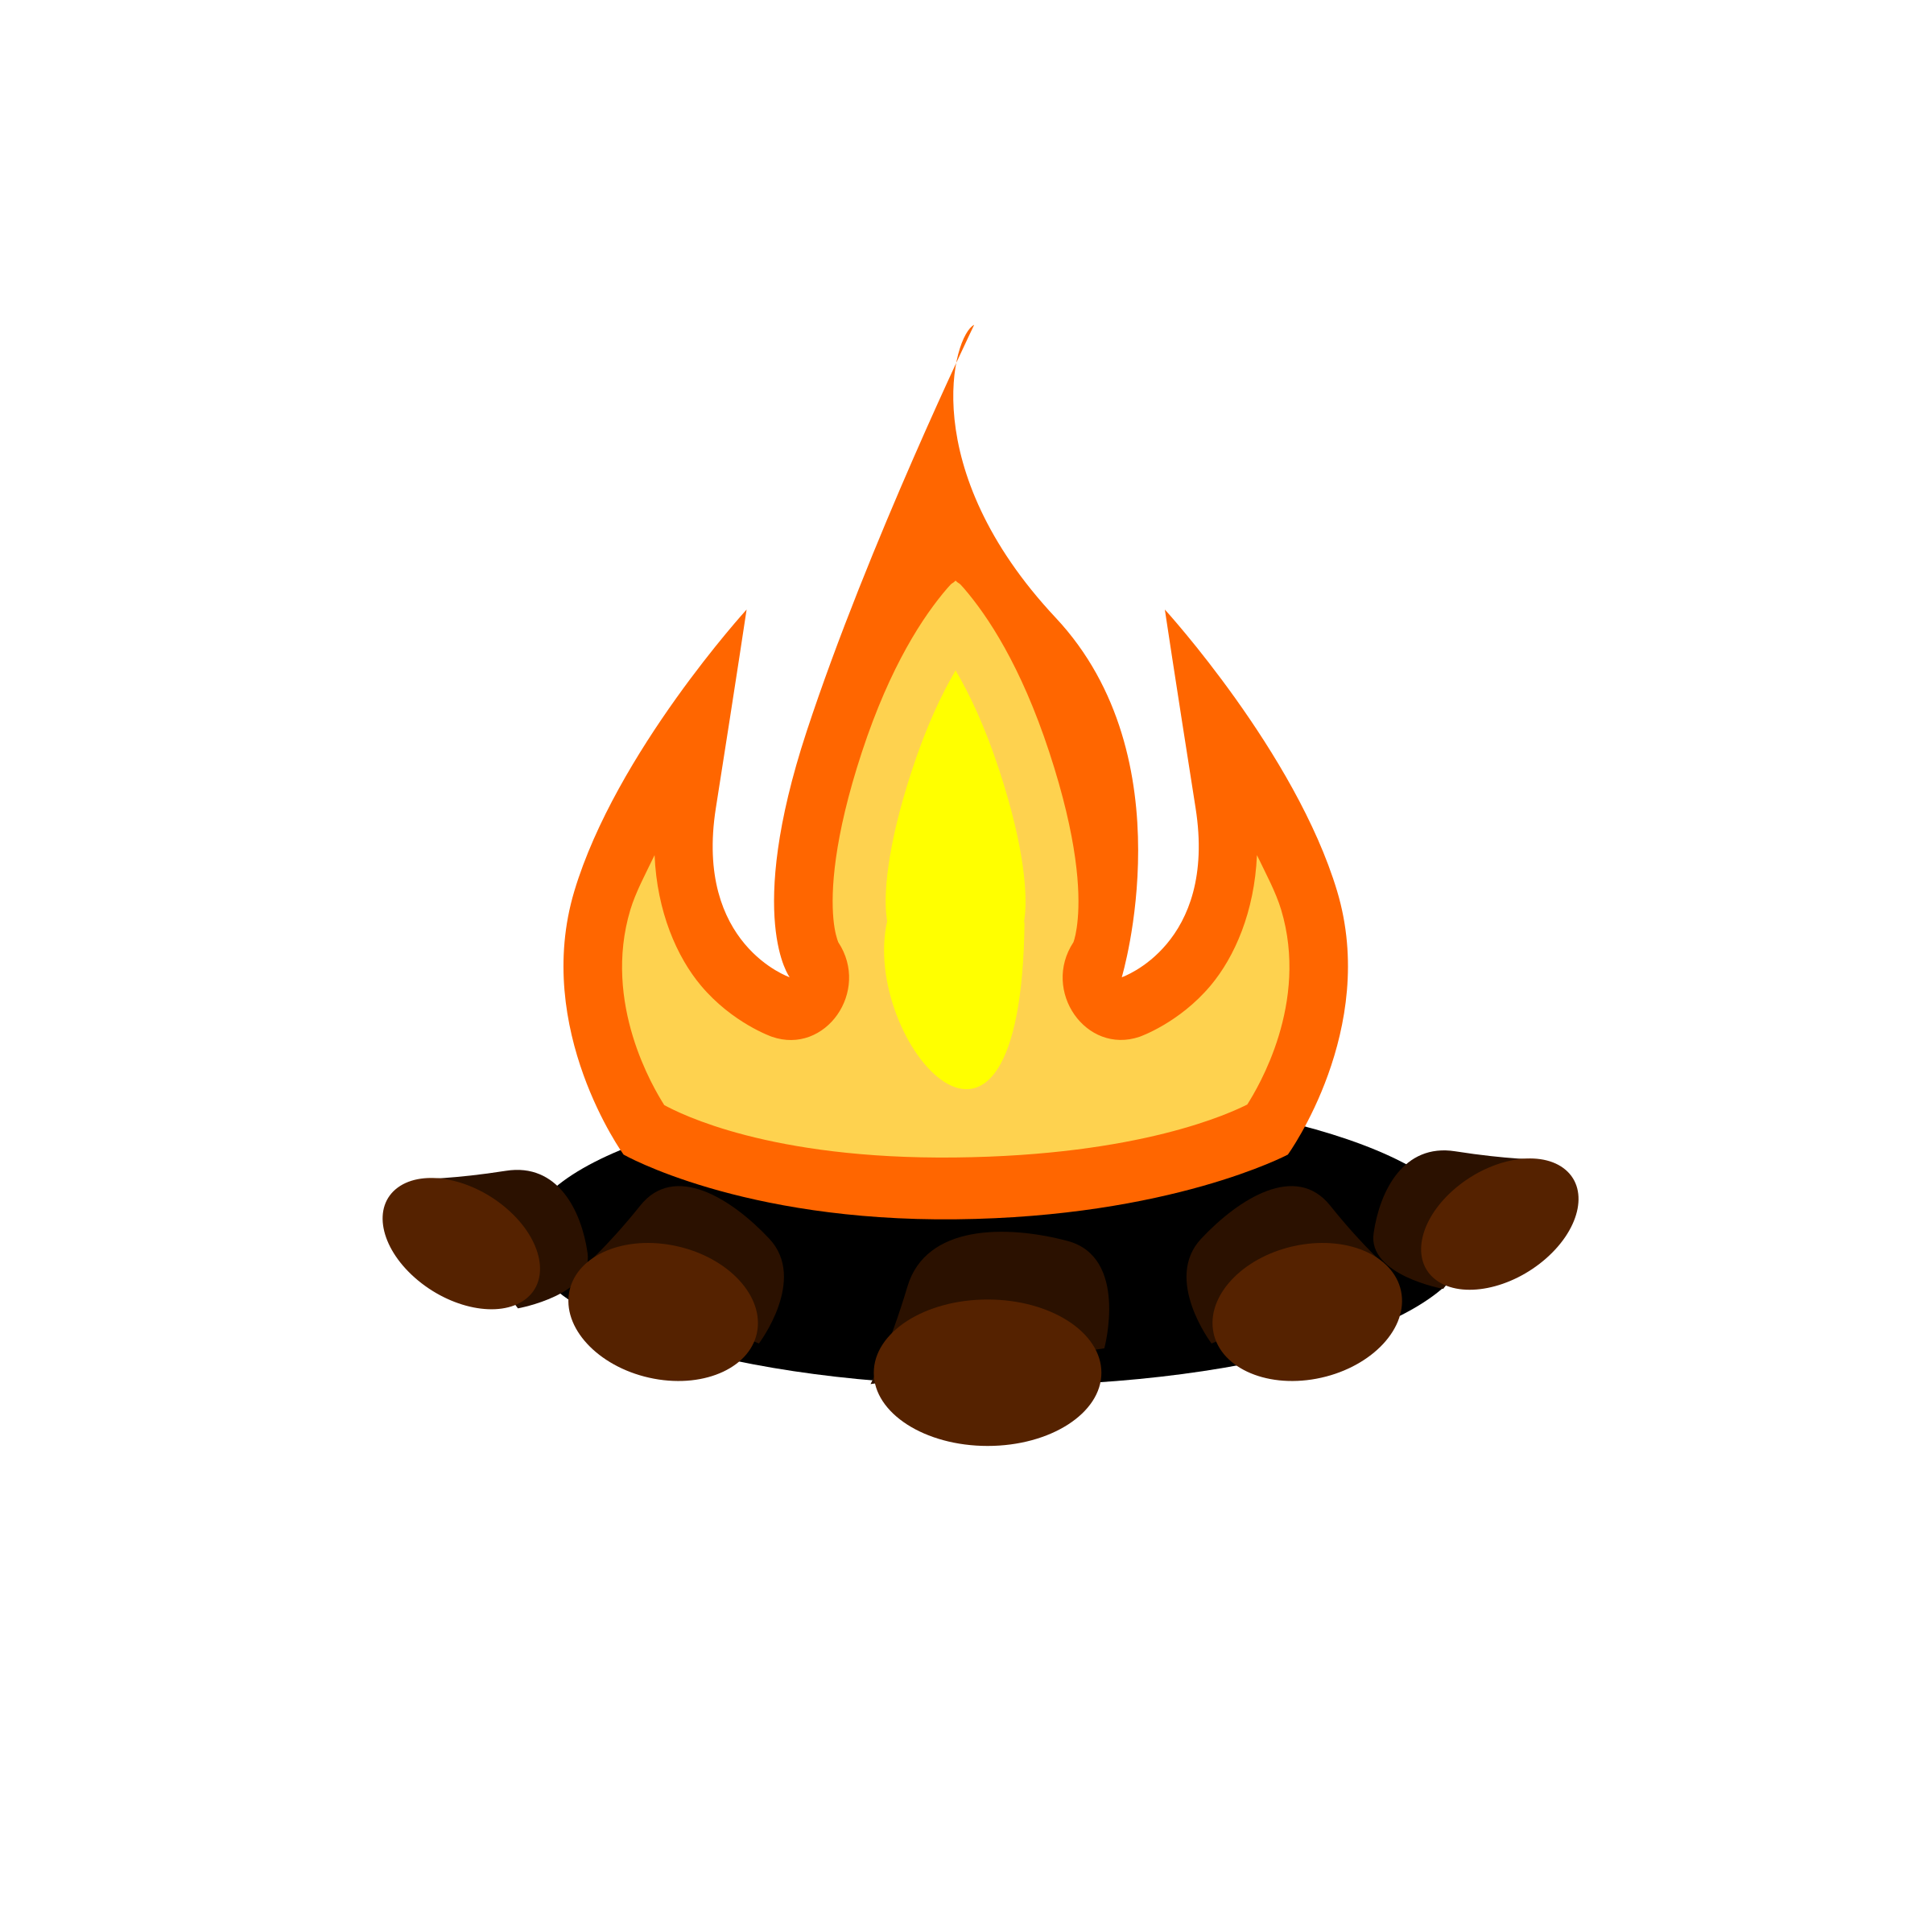 Campfire png images transparent. Clipart people fire